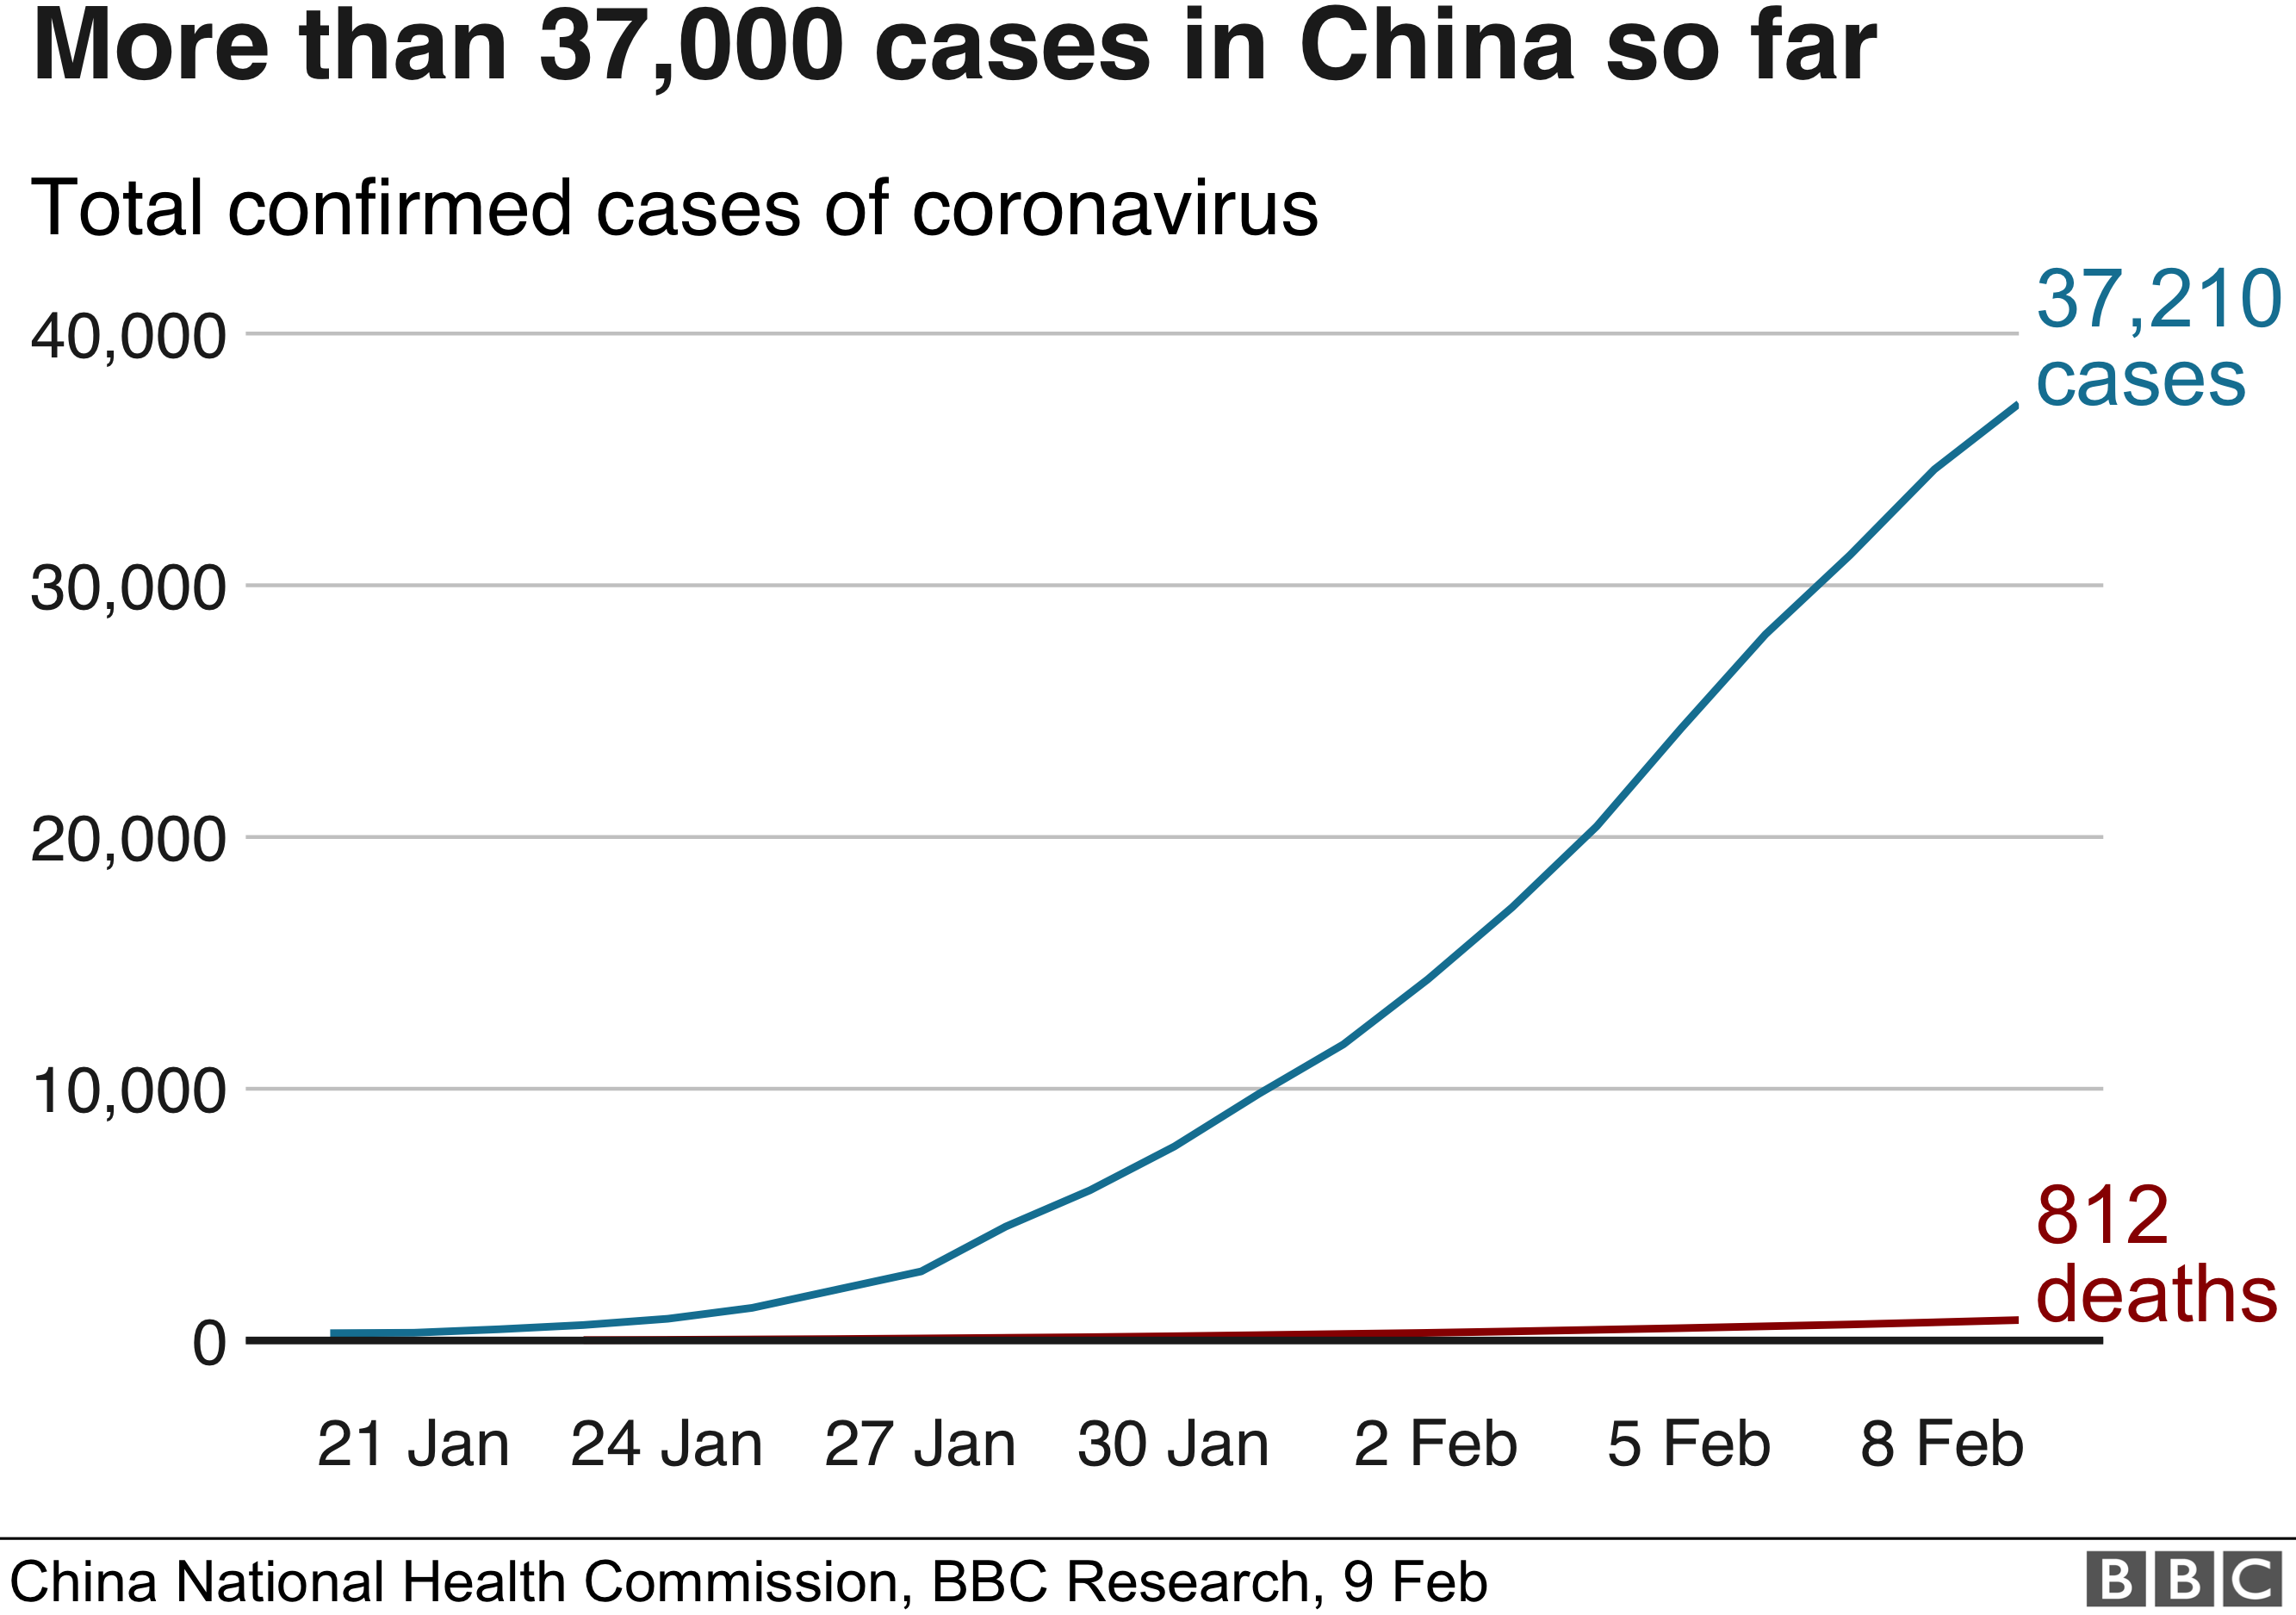 Graph showing total confirmed cases at 9 February 2020: 812 deaths and 37,210 cases